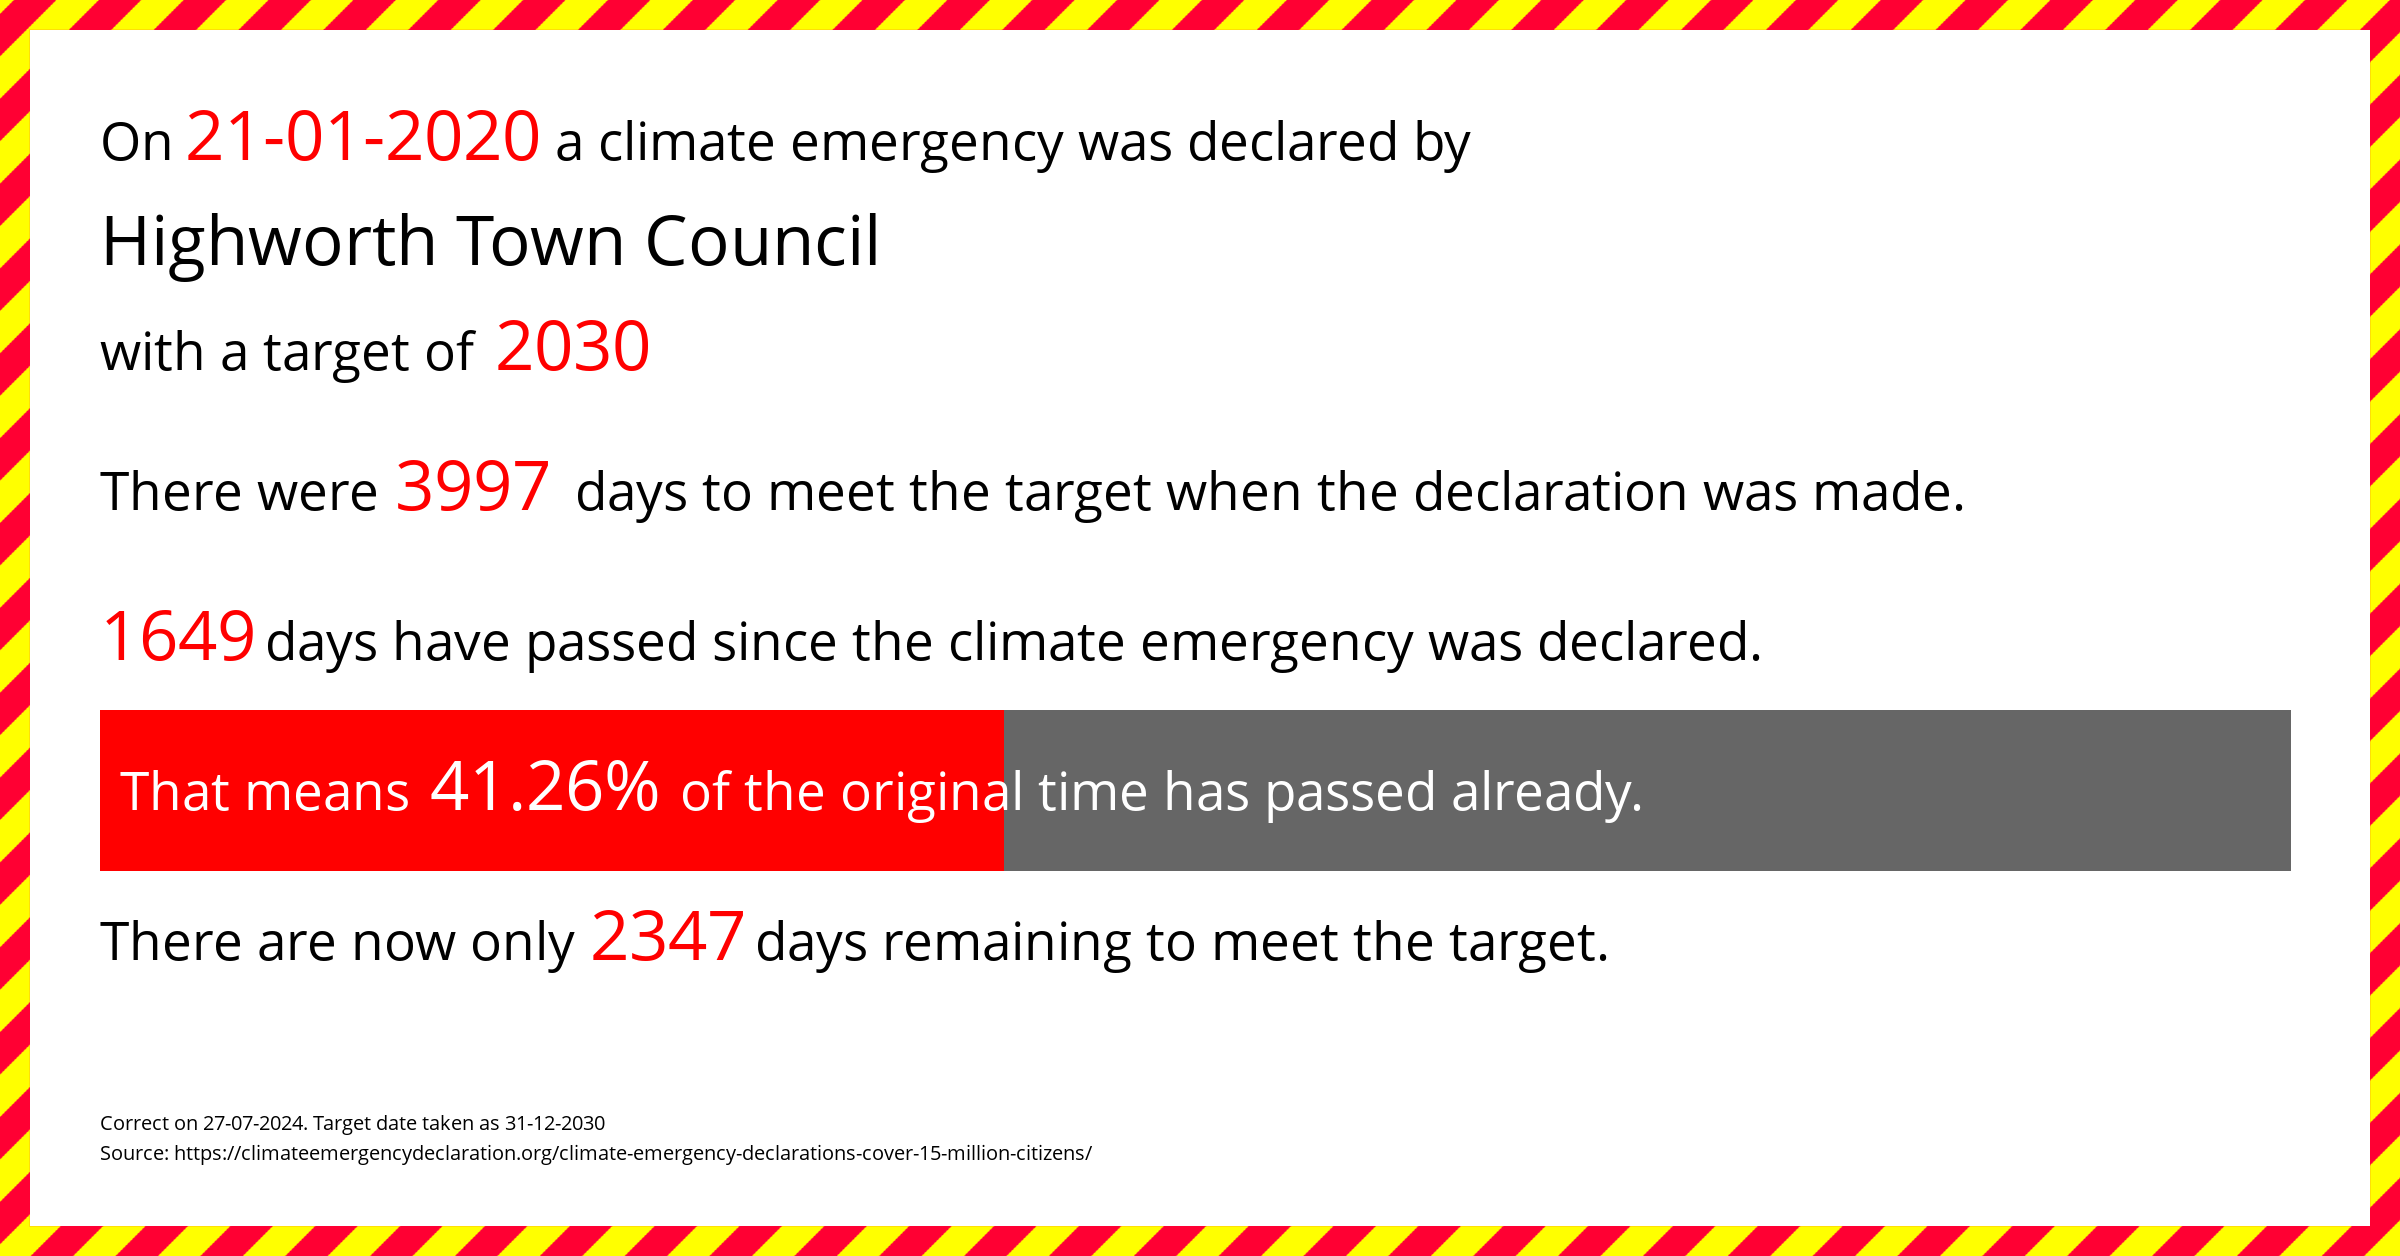 Highworth Town Council declared a Climate emergency on Tuesday 21st January 2020, with a target of 2030.